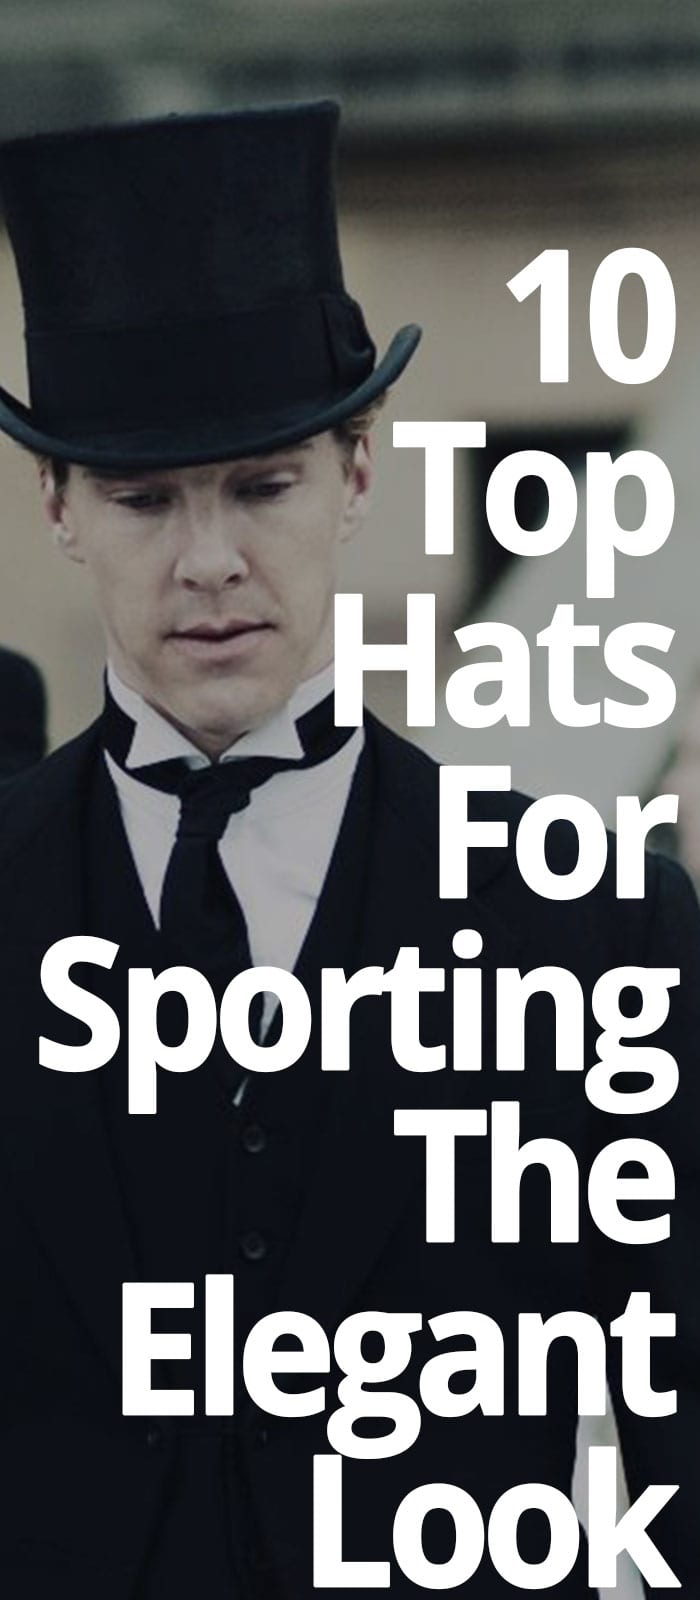 TOP HATS FOR SPORTING THE ELEGANT LOOK